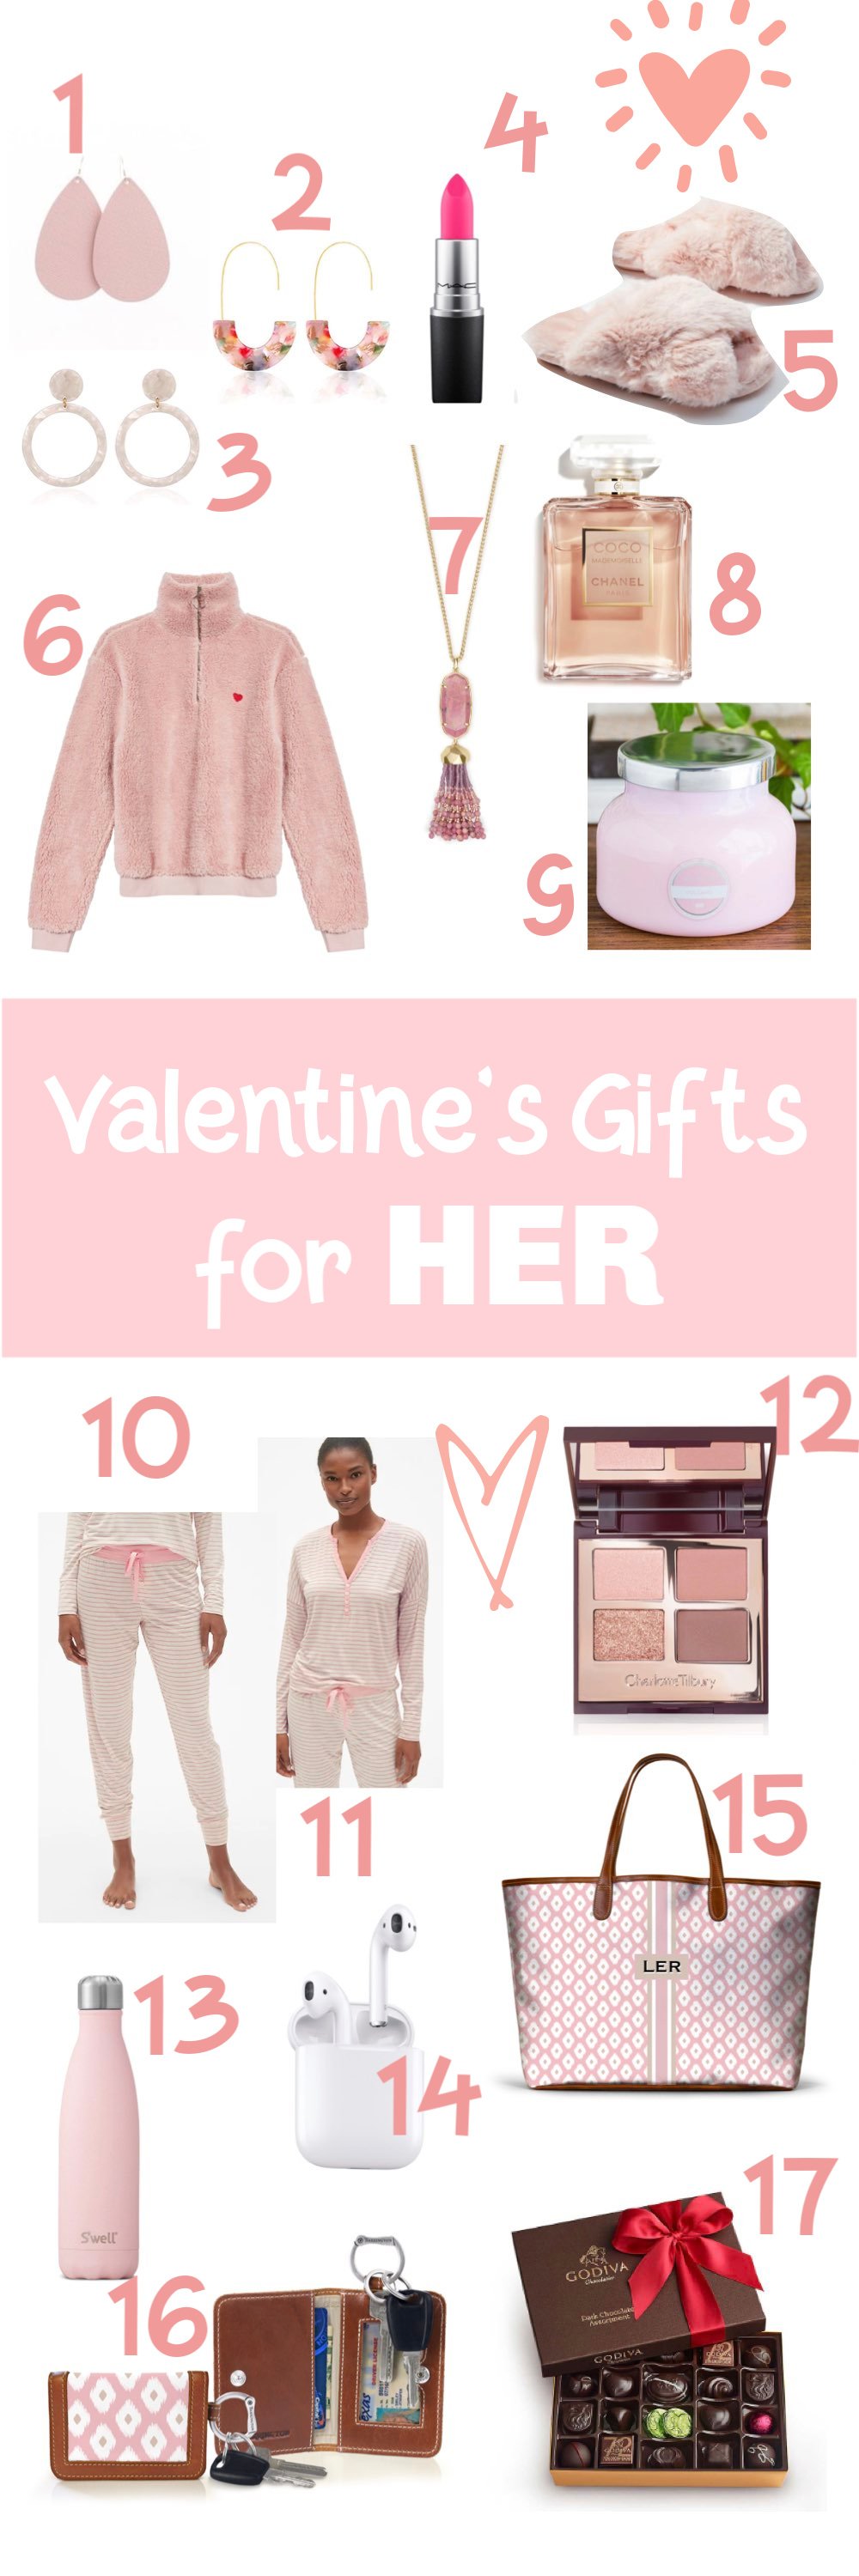 3 Things and Valentine’s Gift Ideas for Her